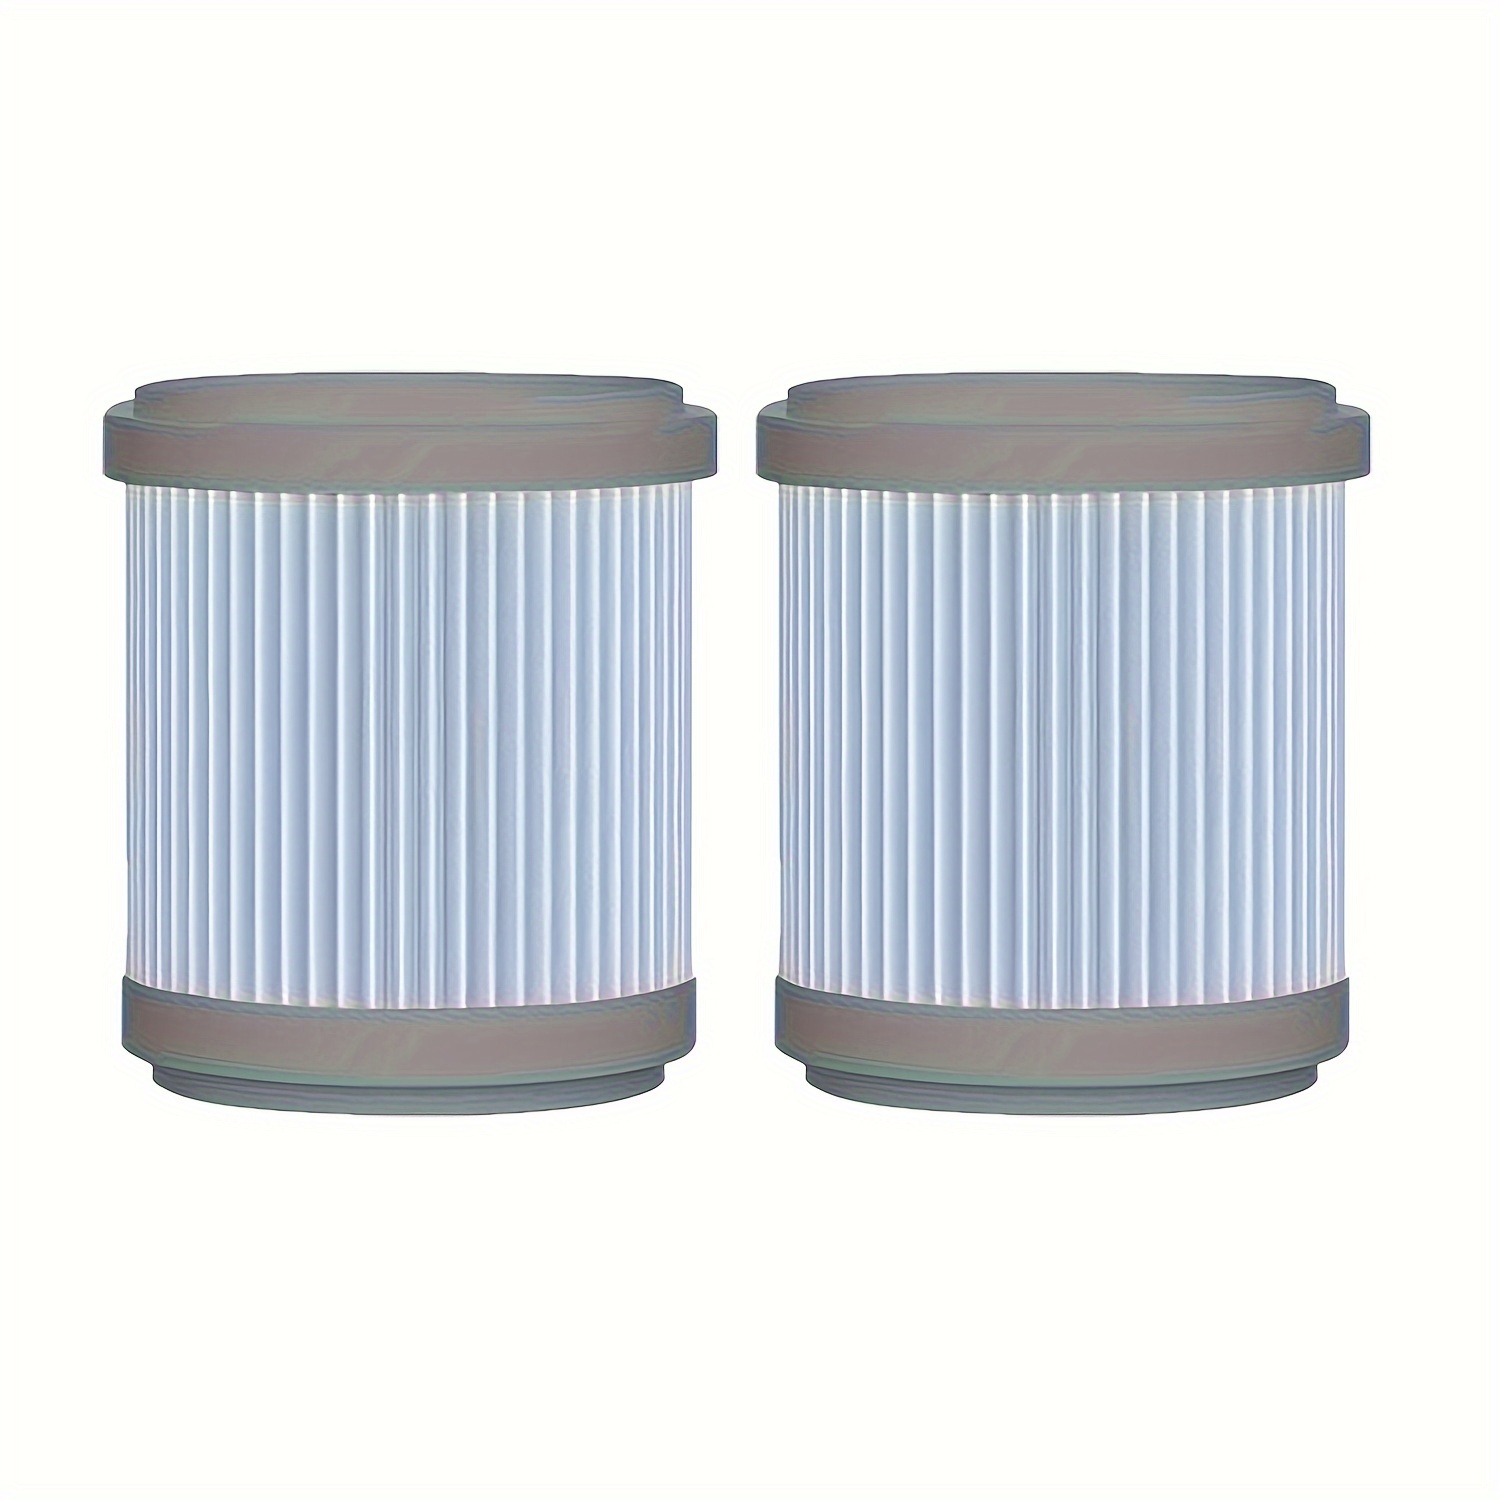 

2-pack Filter Elements For Ej-jhq01 - Suitable For Humidifiers